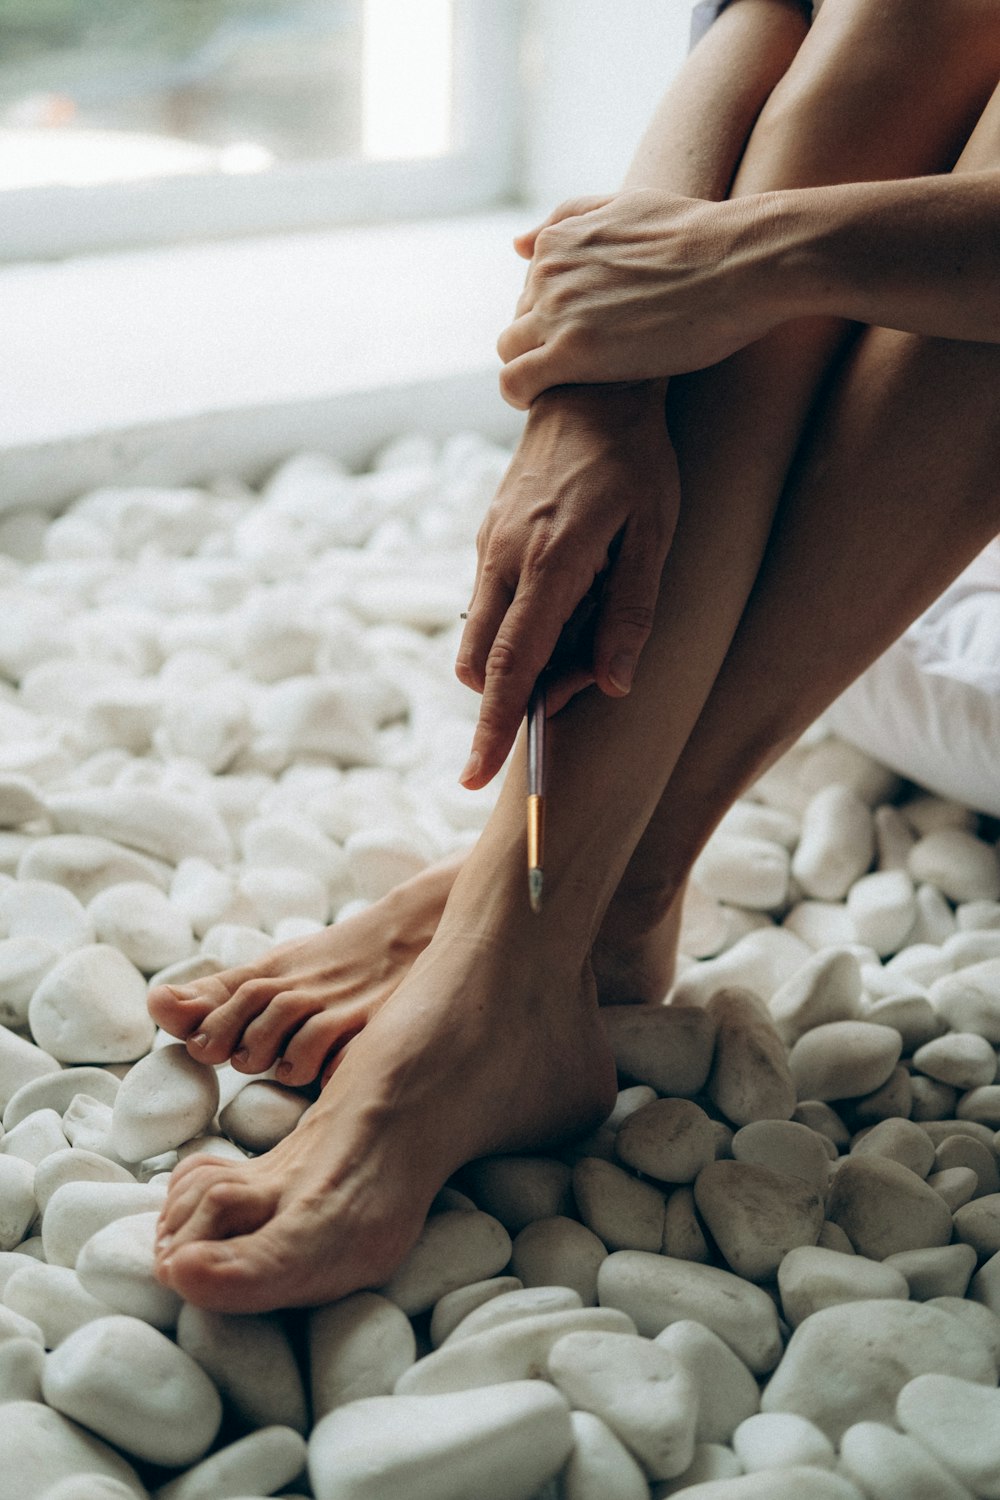 persons feet on white and gray pebbles